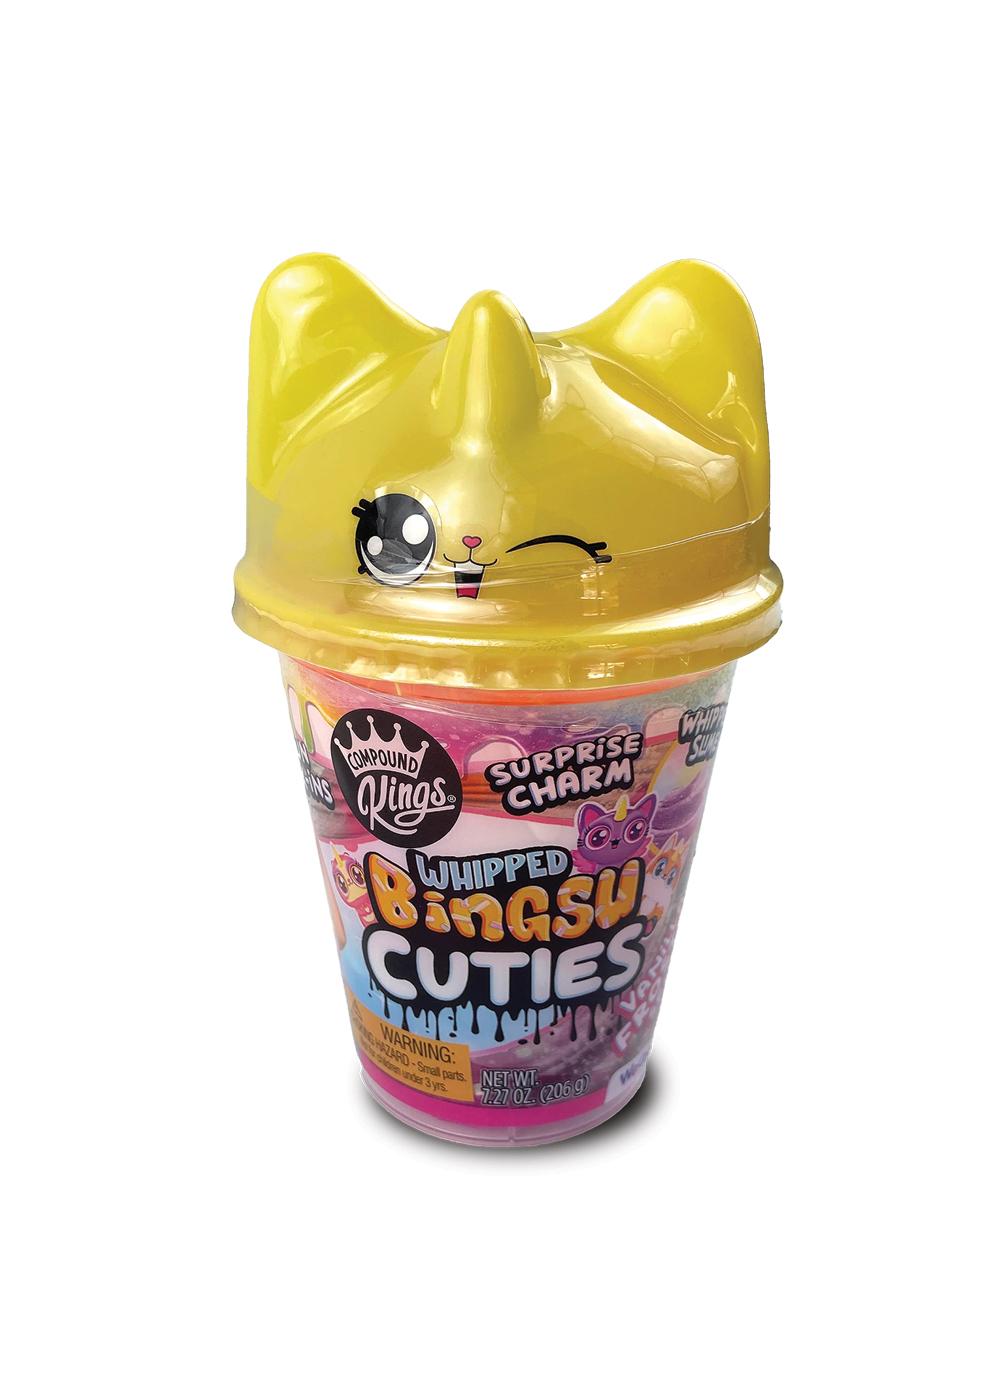 Compound Kings Whipped Bingsu Cuties Scented Slime, Assorted; image 1 of 2